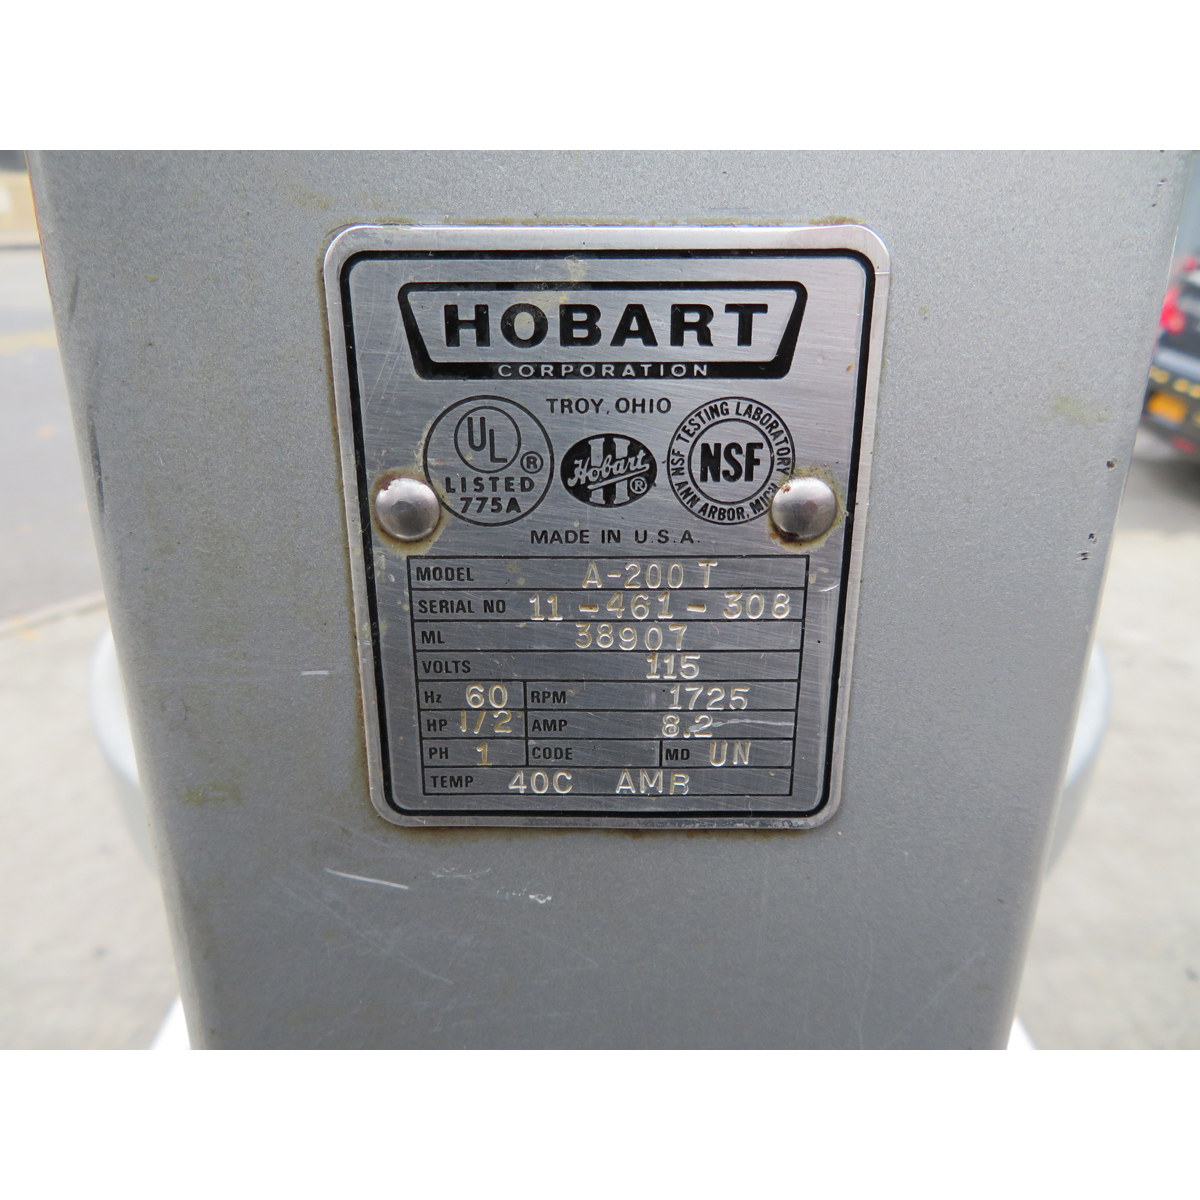 Hobart 20 Quart A200T Mixer, With Stand Used Great Condition image 2